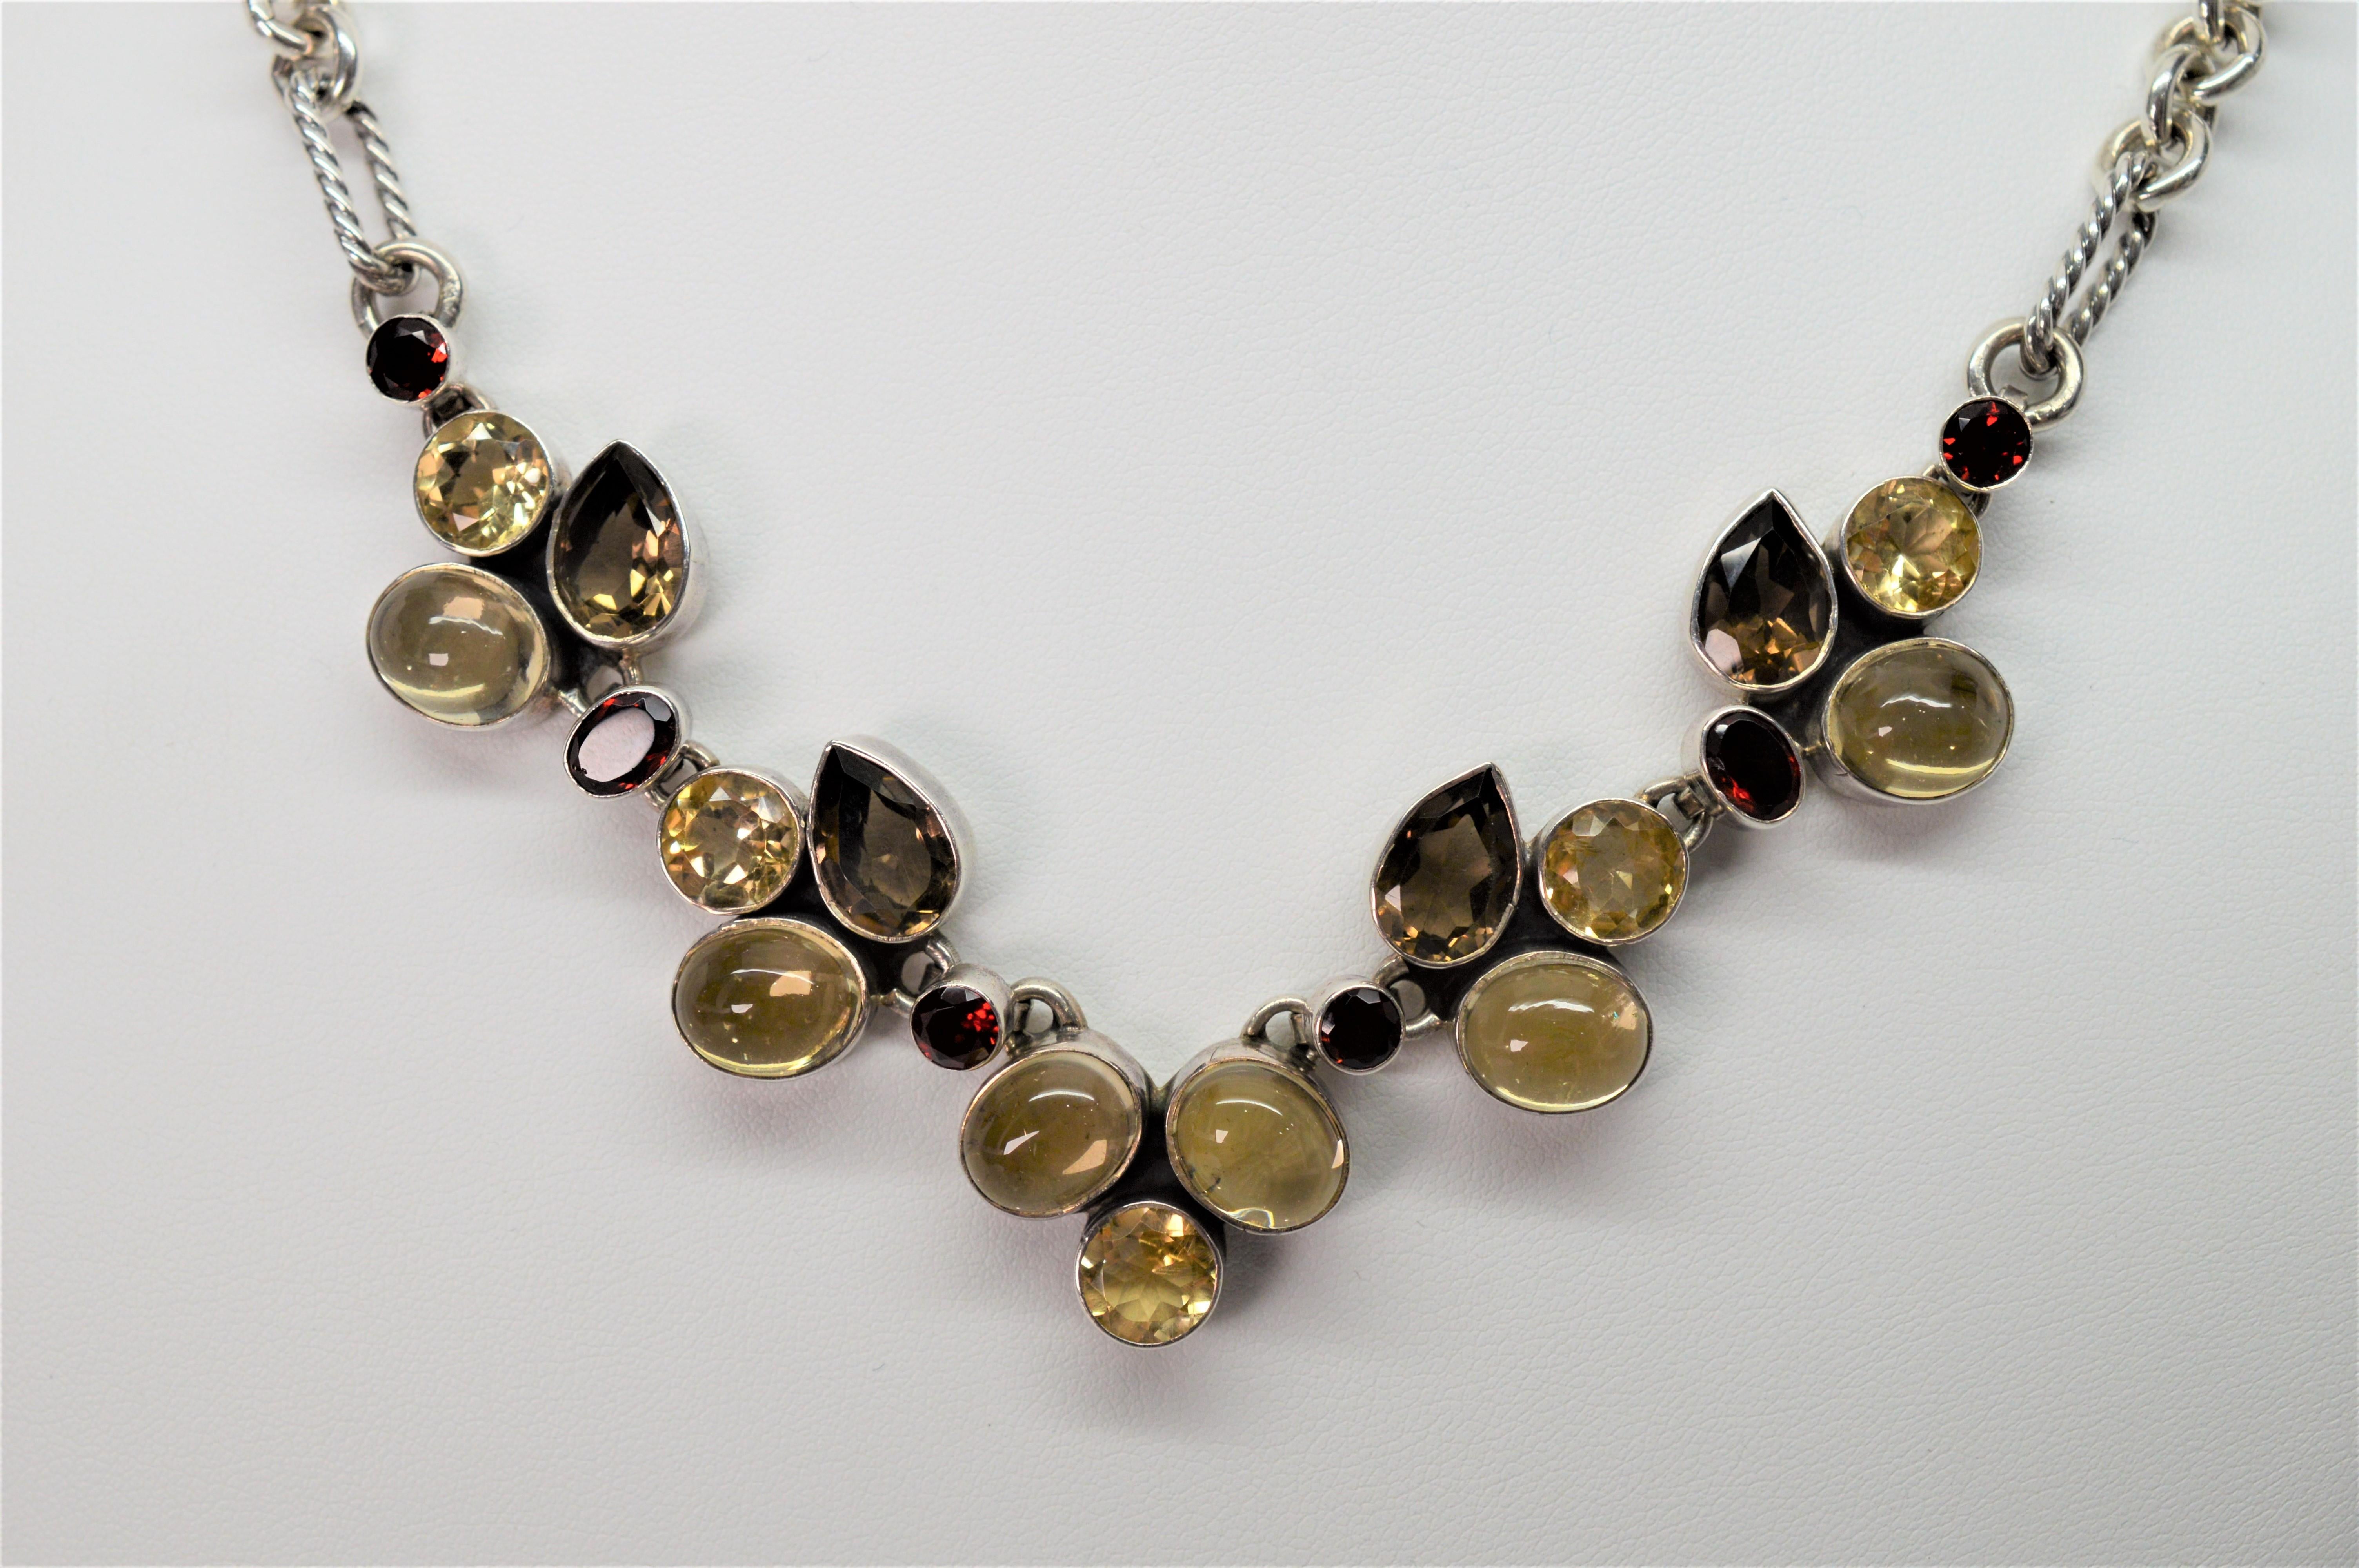 Warm tones of smokey topaz, garnet, citrine and white quartz, all bezel set in sterling silver, create a colorful and striking floral patterned display spanning five inches across the front placket of this vintage statement necklace.  Great with a